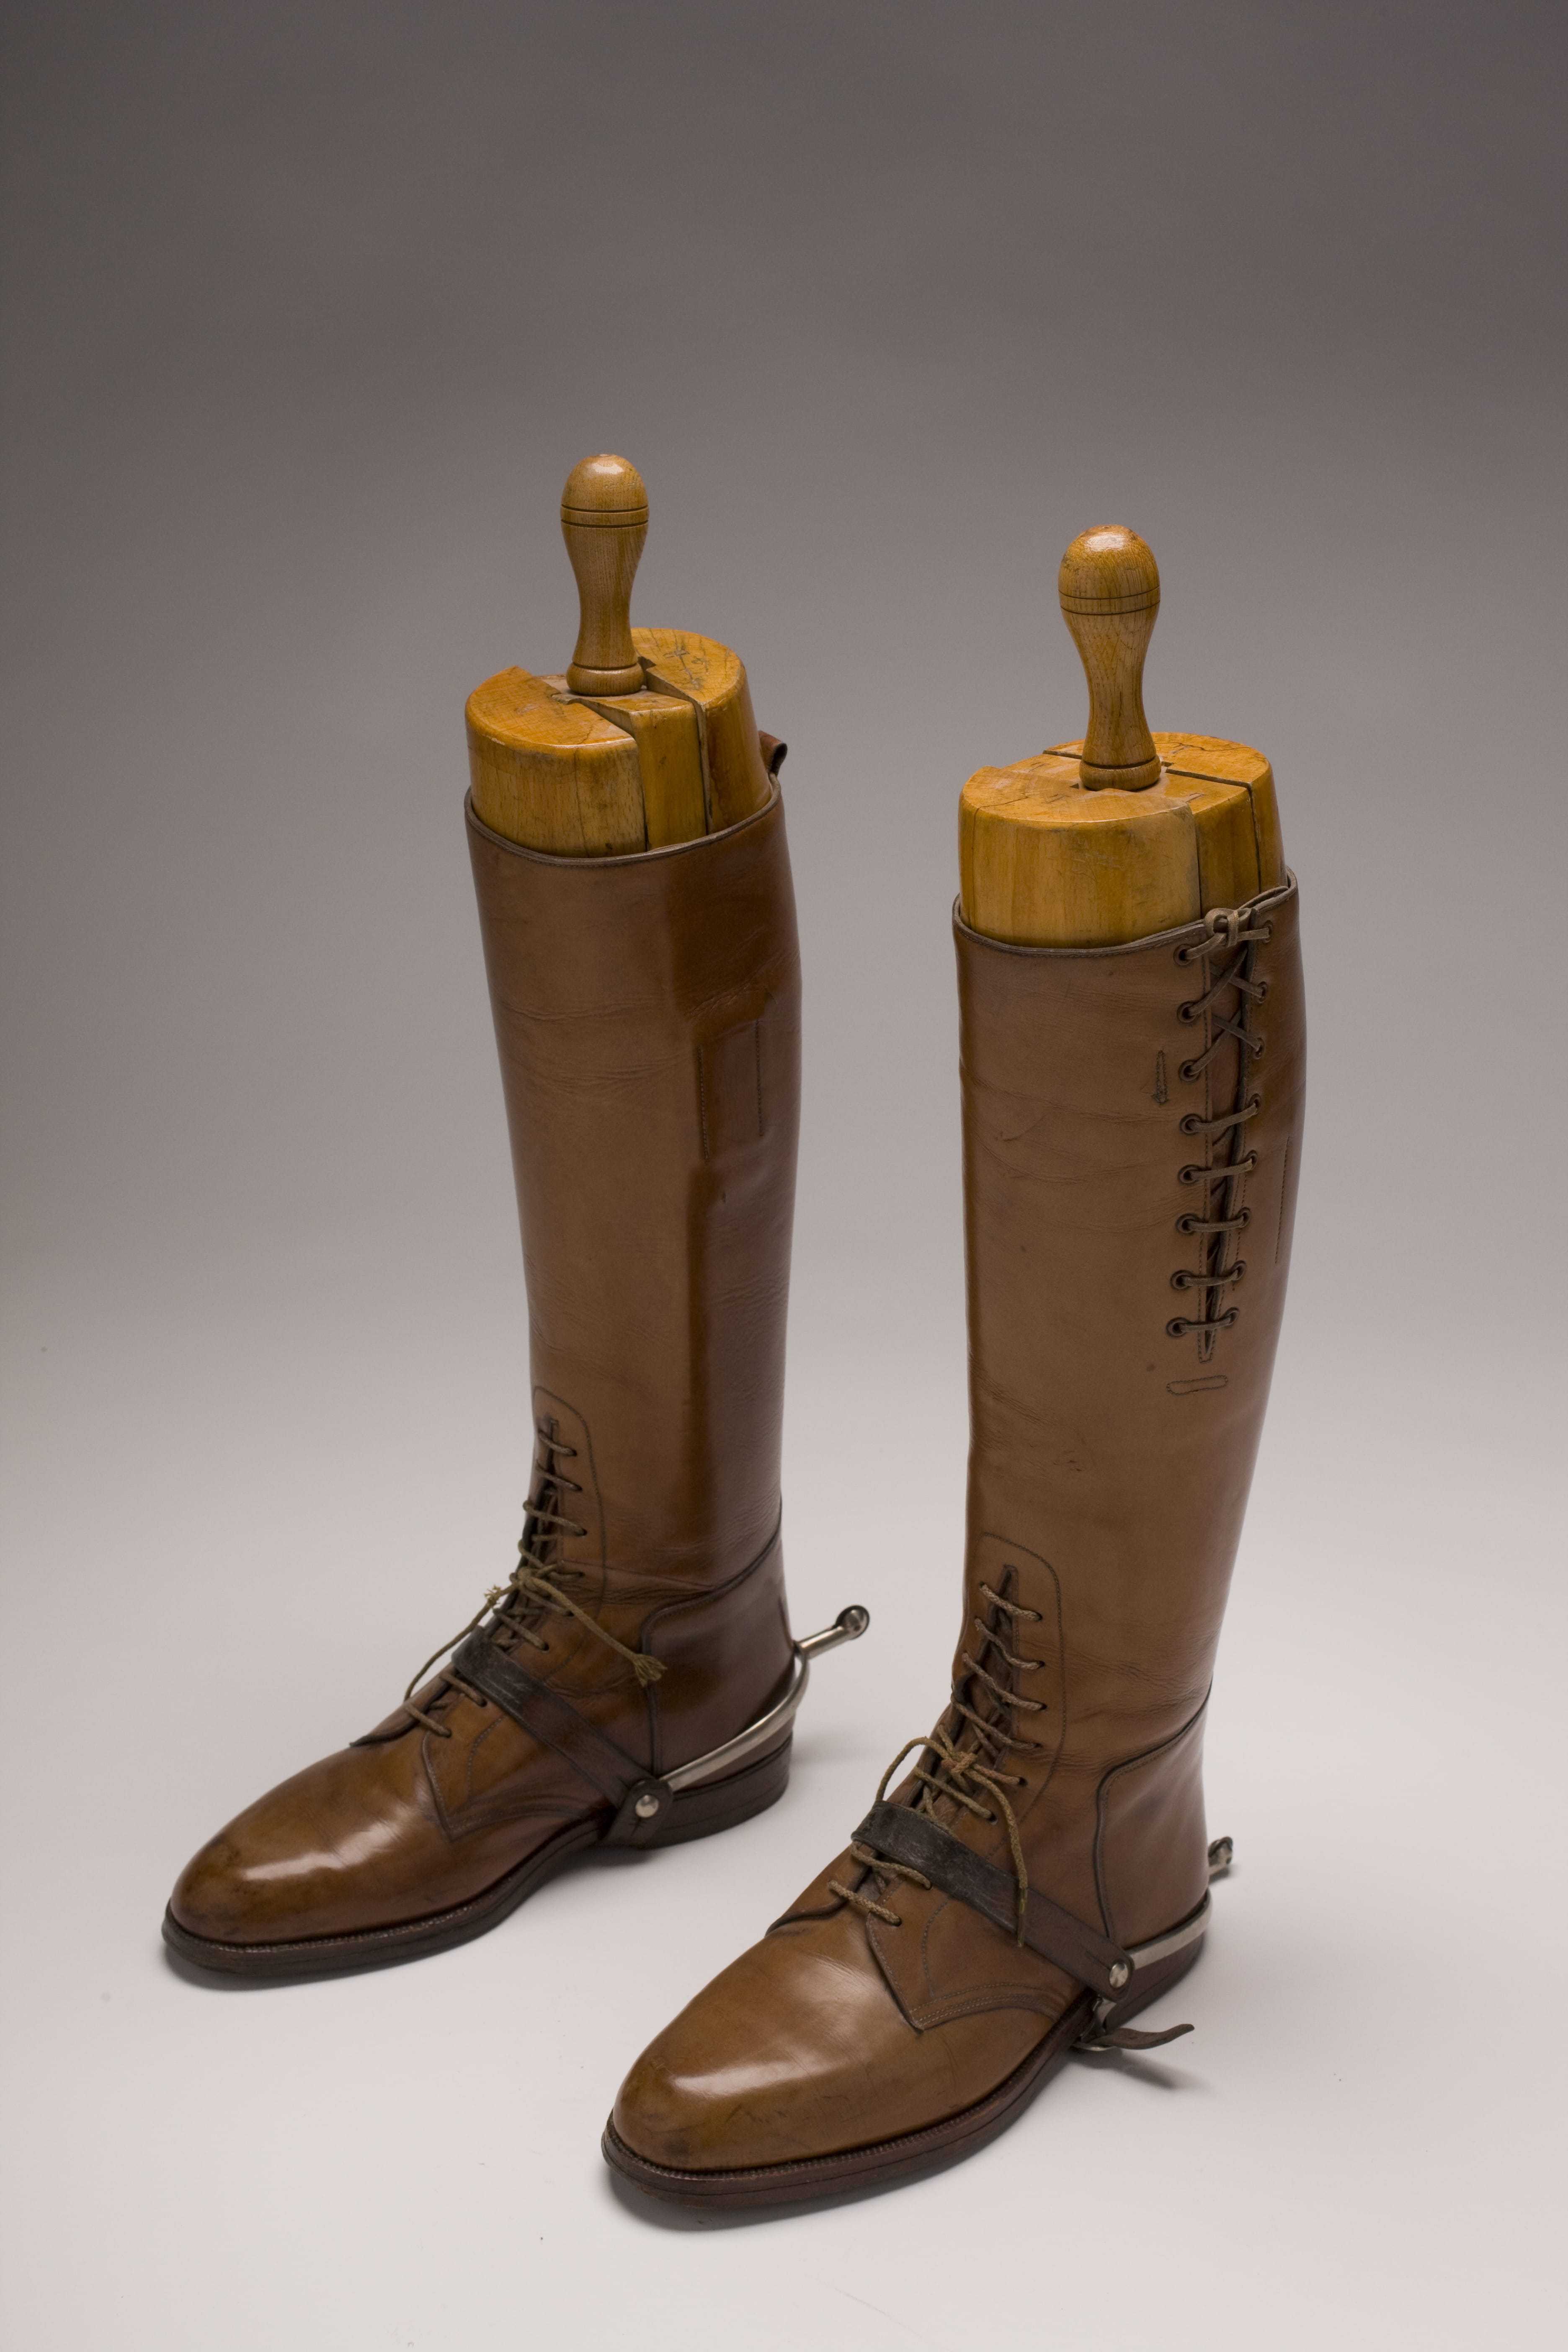 Tall brown leather boots with laces on the front and sides